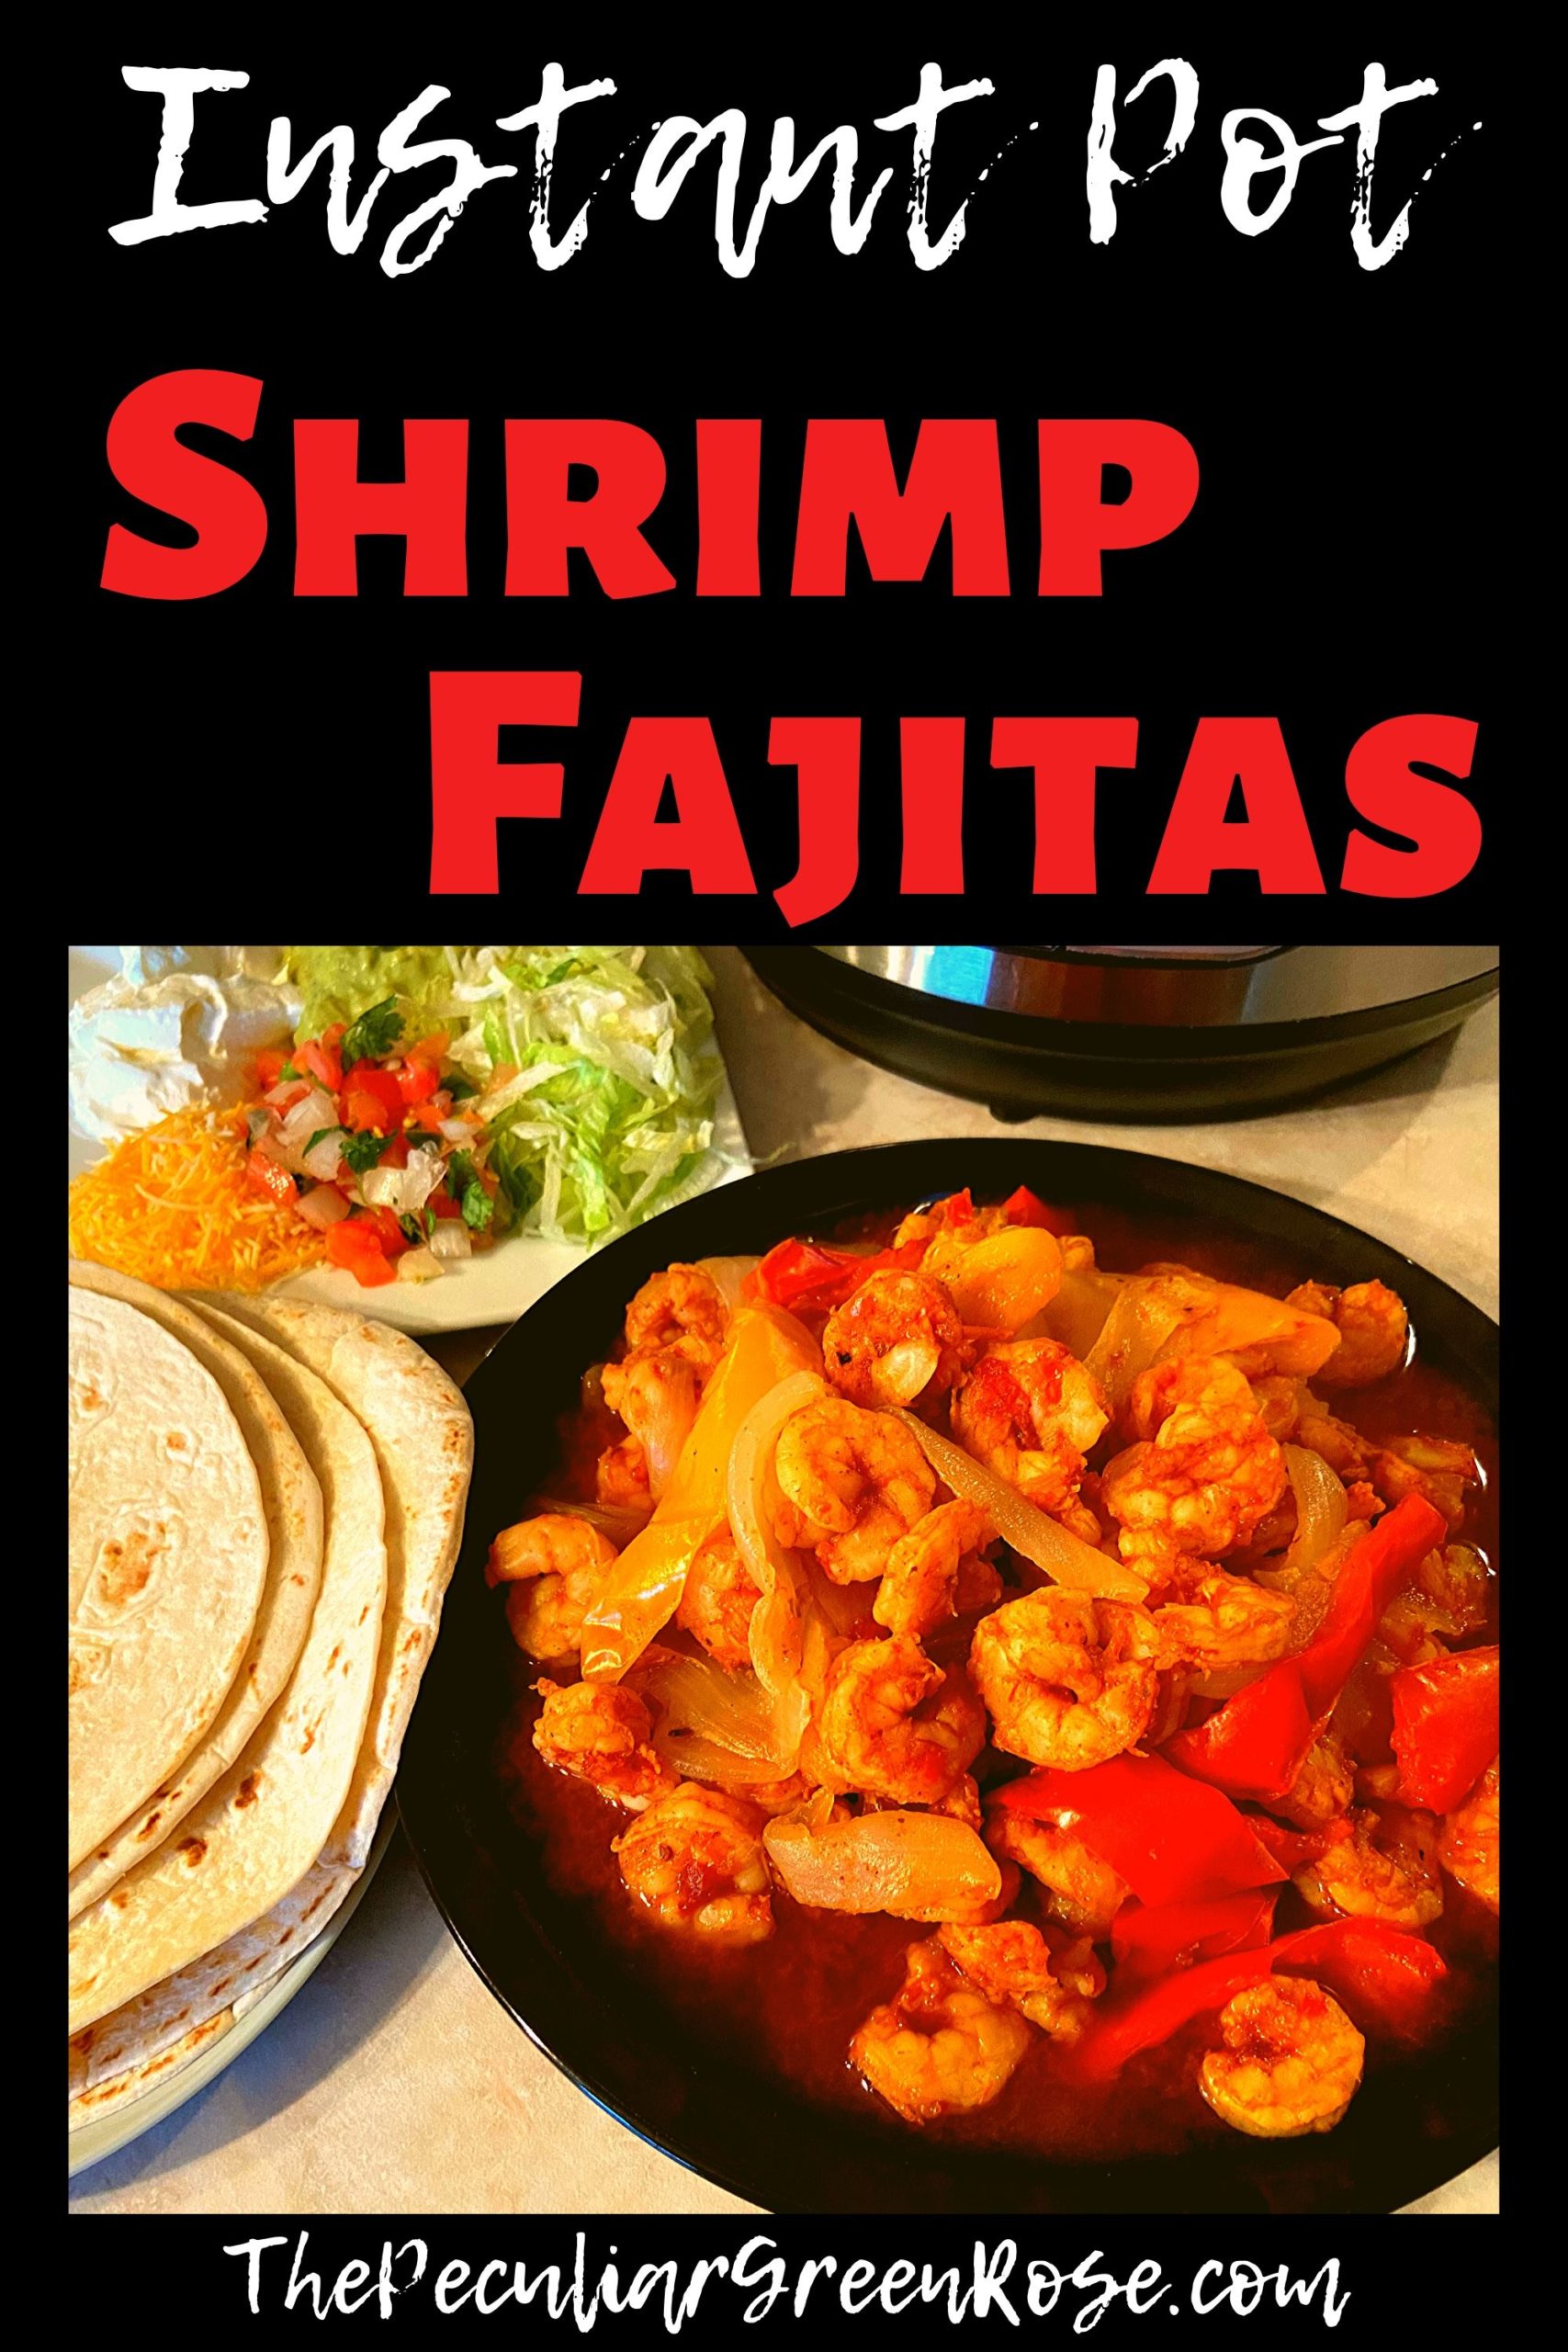 A black plate filled with shrimp, red bell peppers, yellow bell peppers, and onions. Tortillas, sour cream, shredded cheese, shredded lettuce, and pico de gallo all sitting on a kitchen counter in front of an Instant Pot.